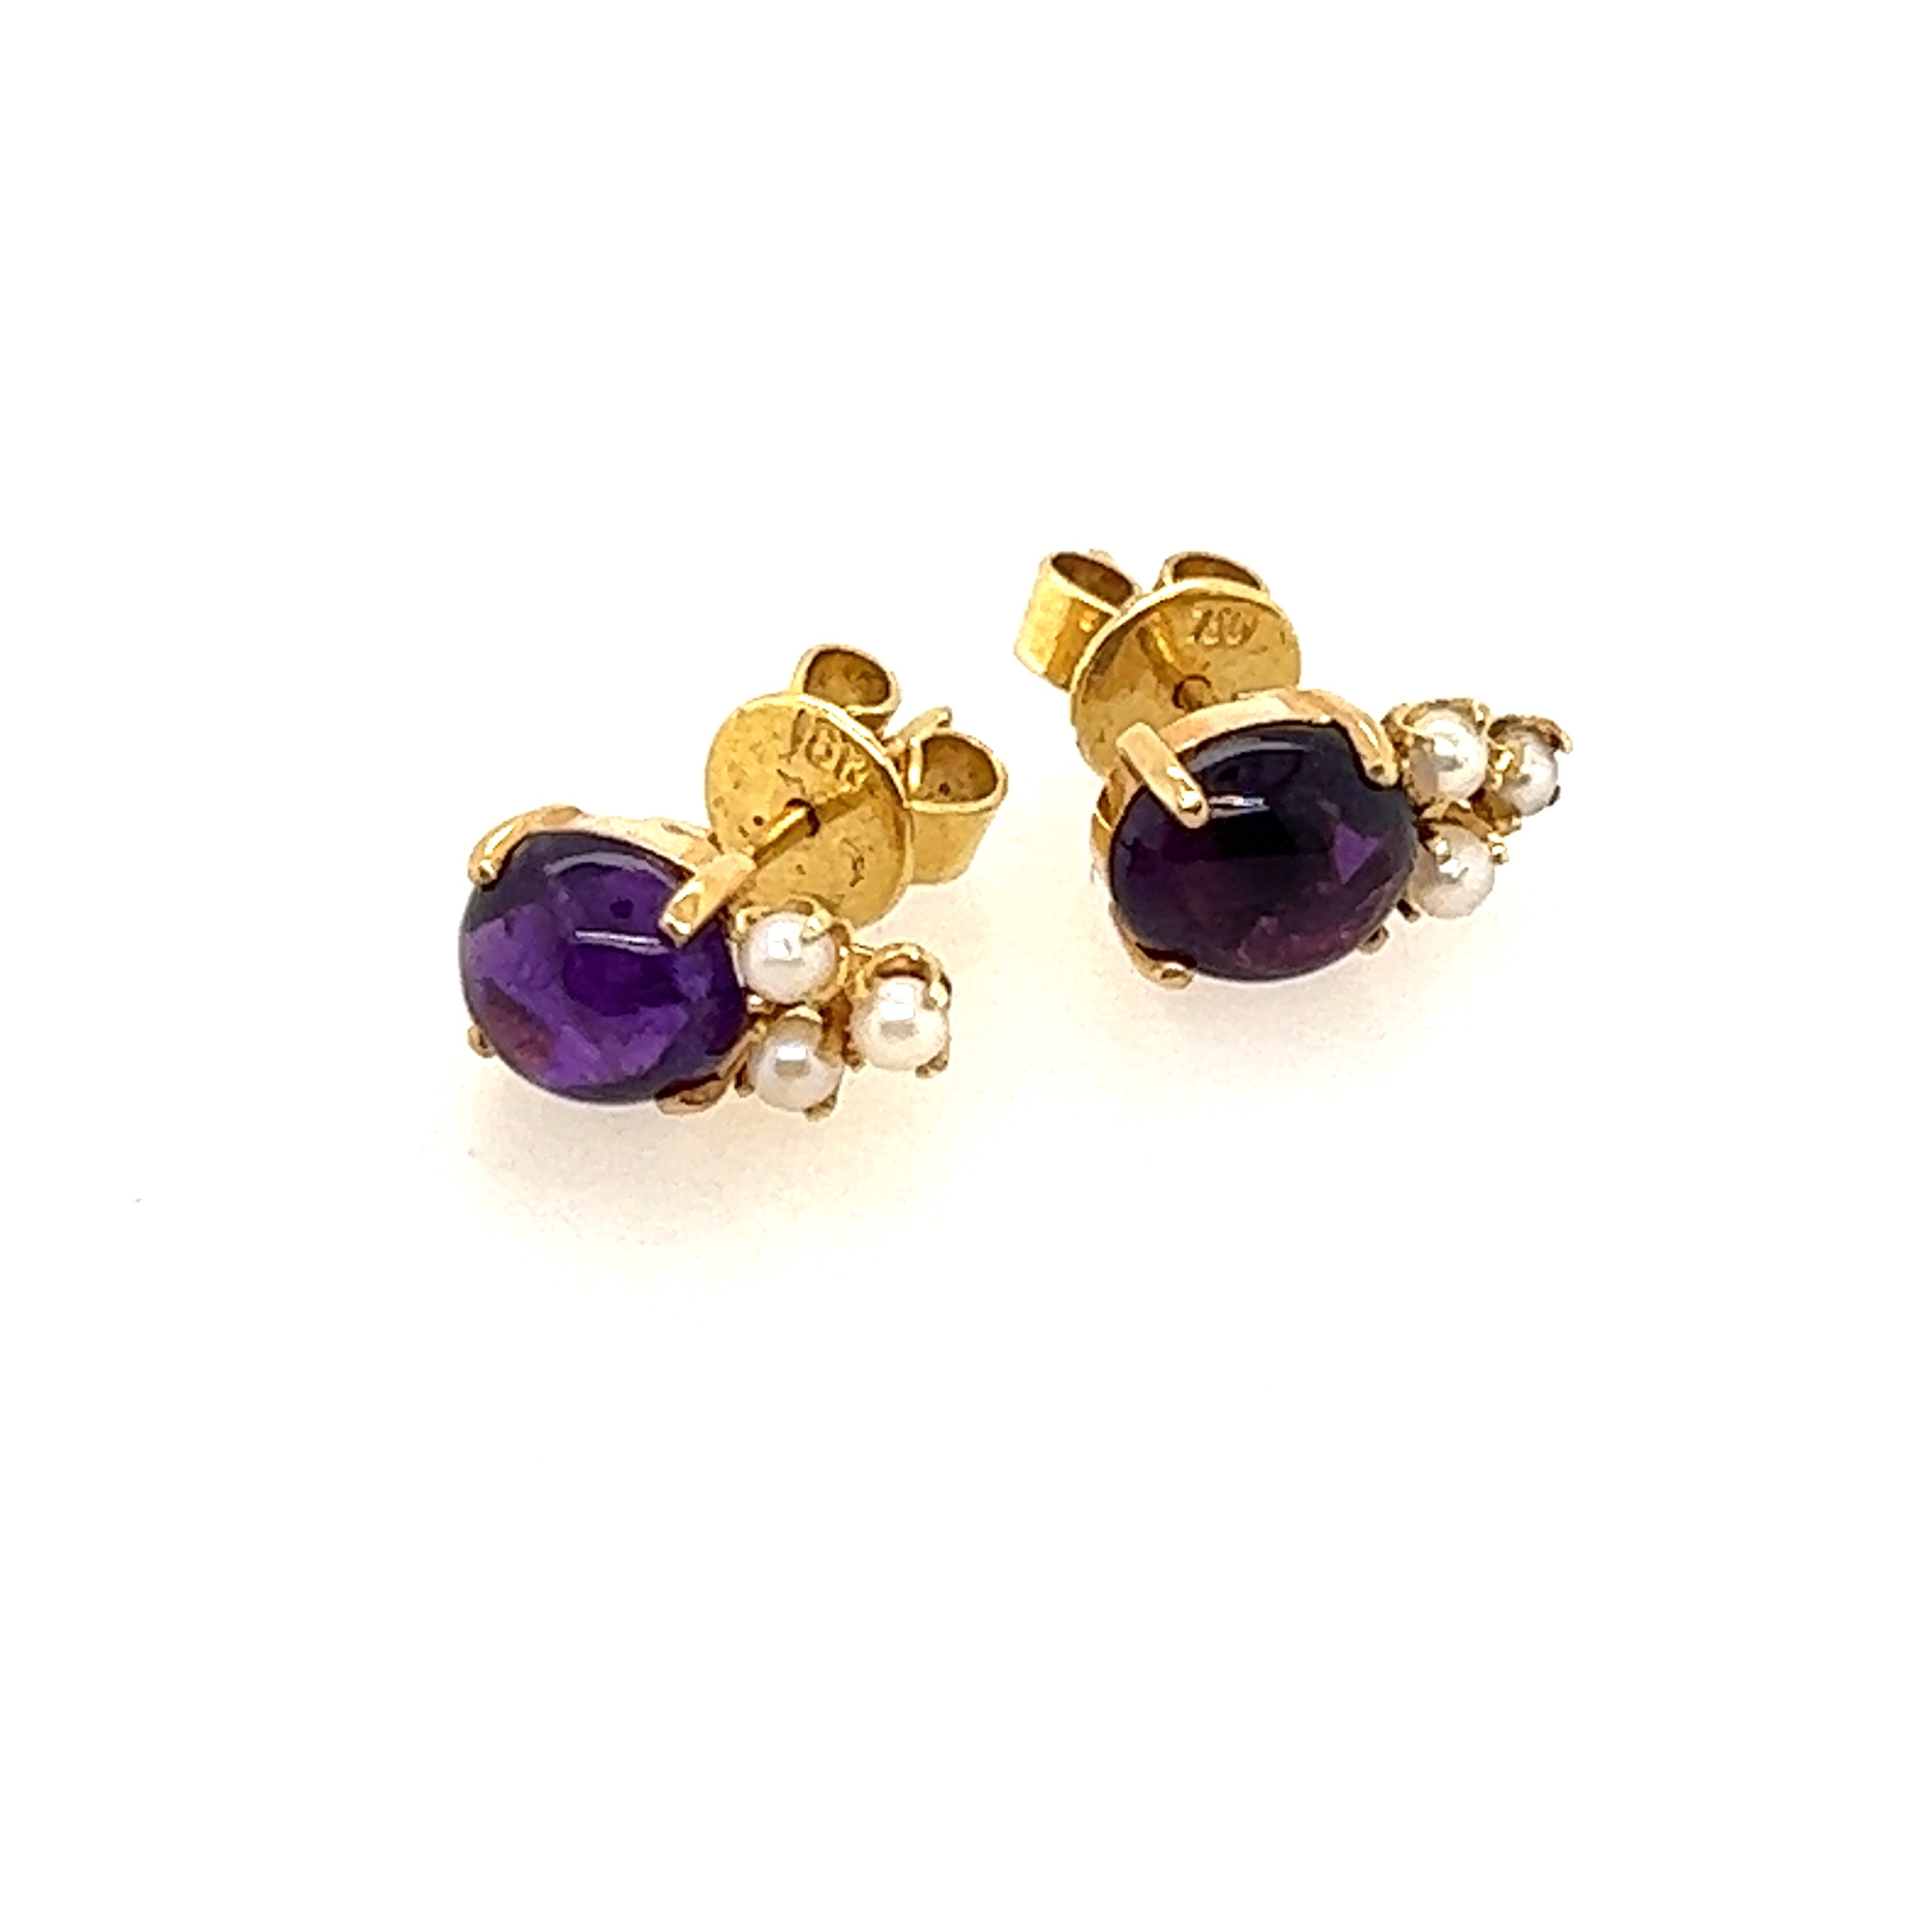 Amethyst & Cultured Pearl Stud earrings set in 18ct Yellow Gold